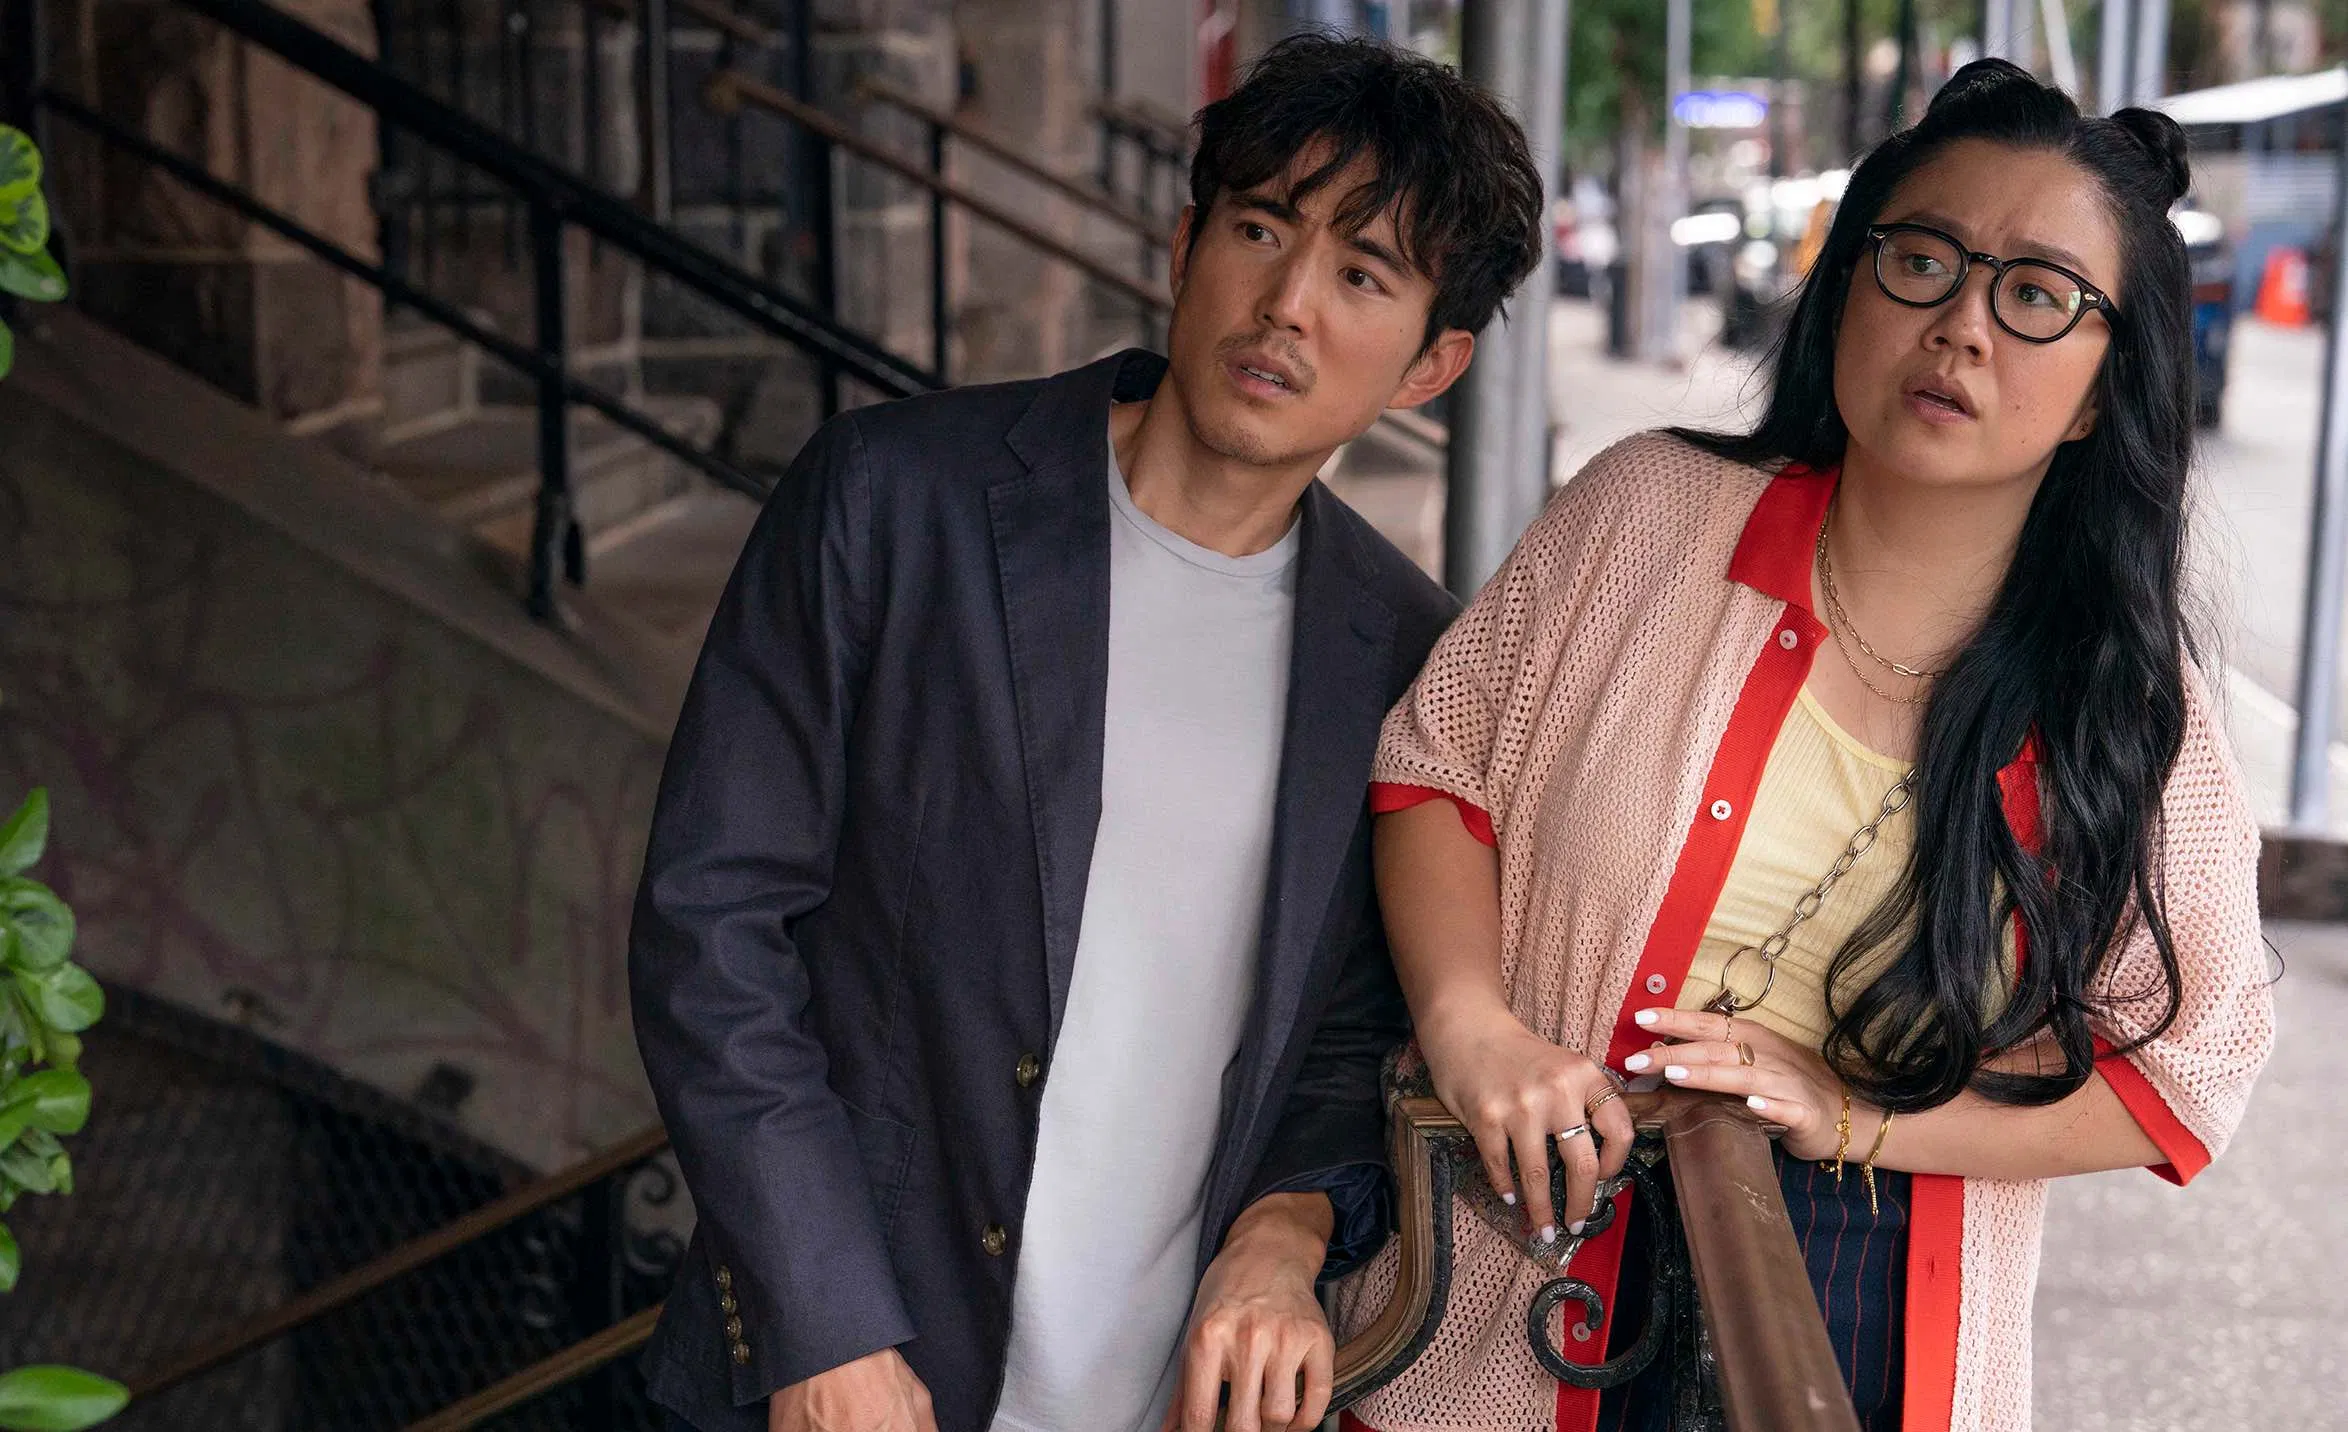 Crazy almost broke Asian-Americans: Min and Cola face their romantic Shortcomings / Photo courtesy of Sundance Institute